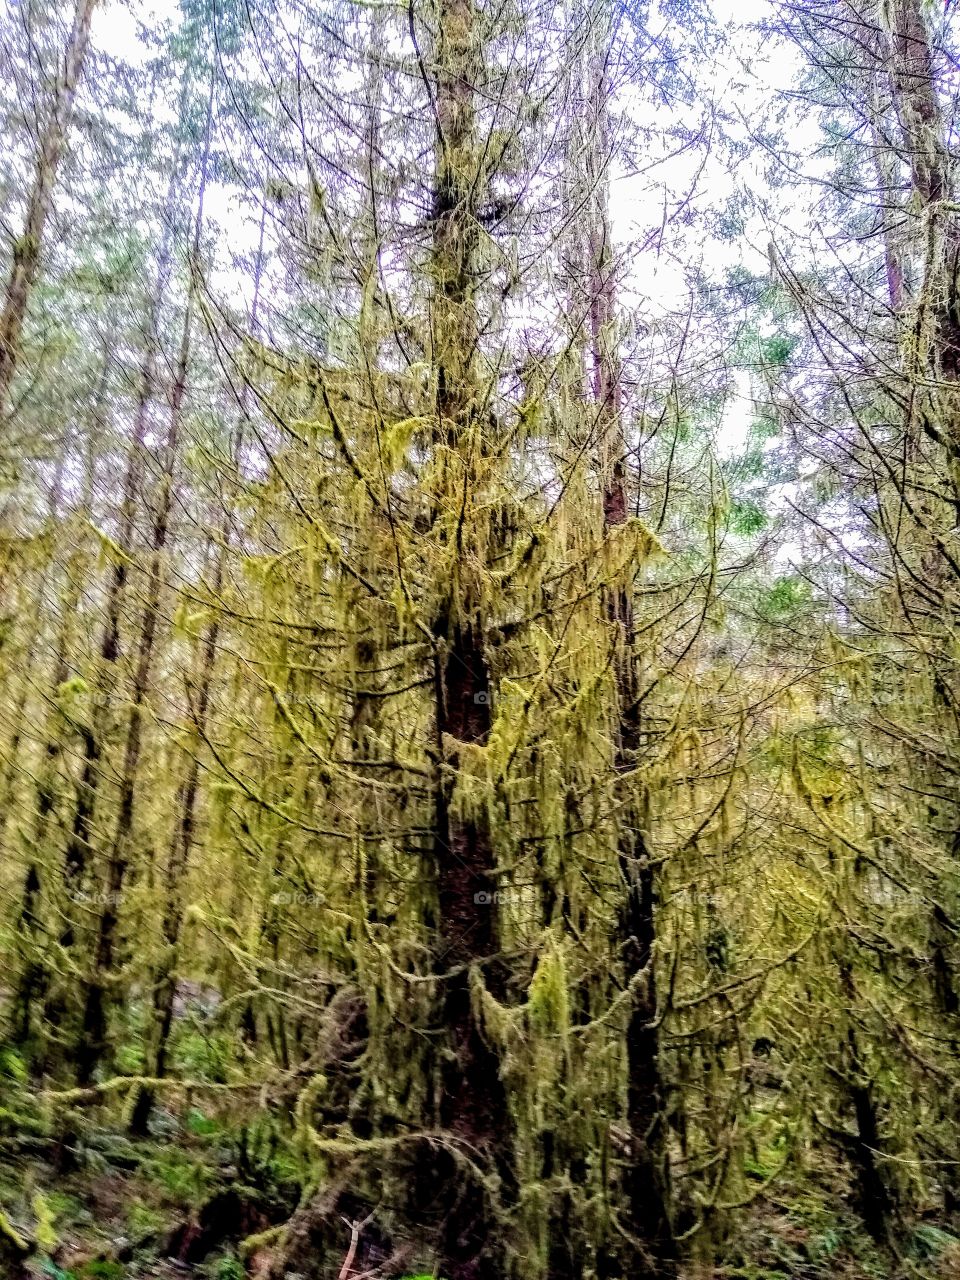 Magical Mossy Forest "Moss is Love"